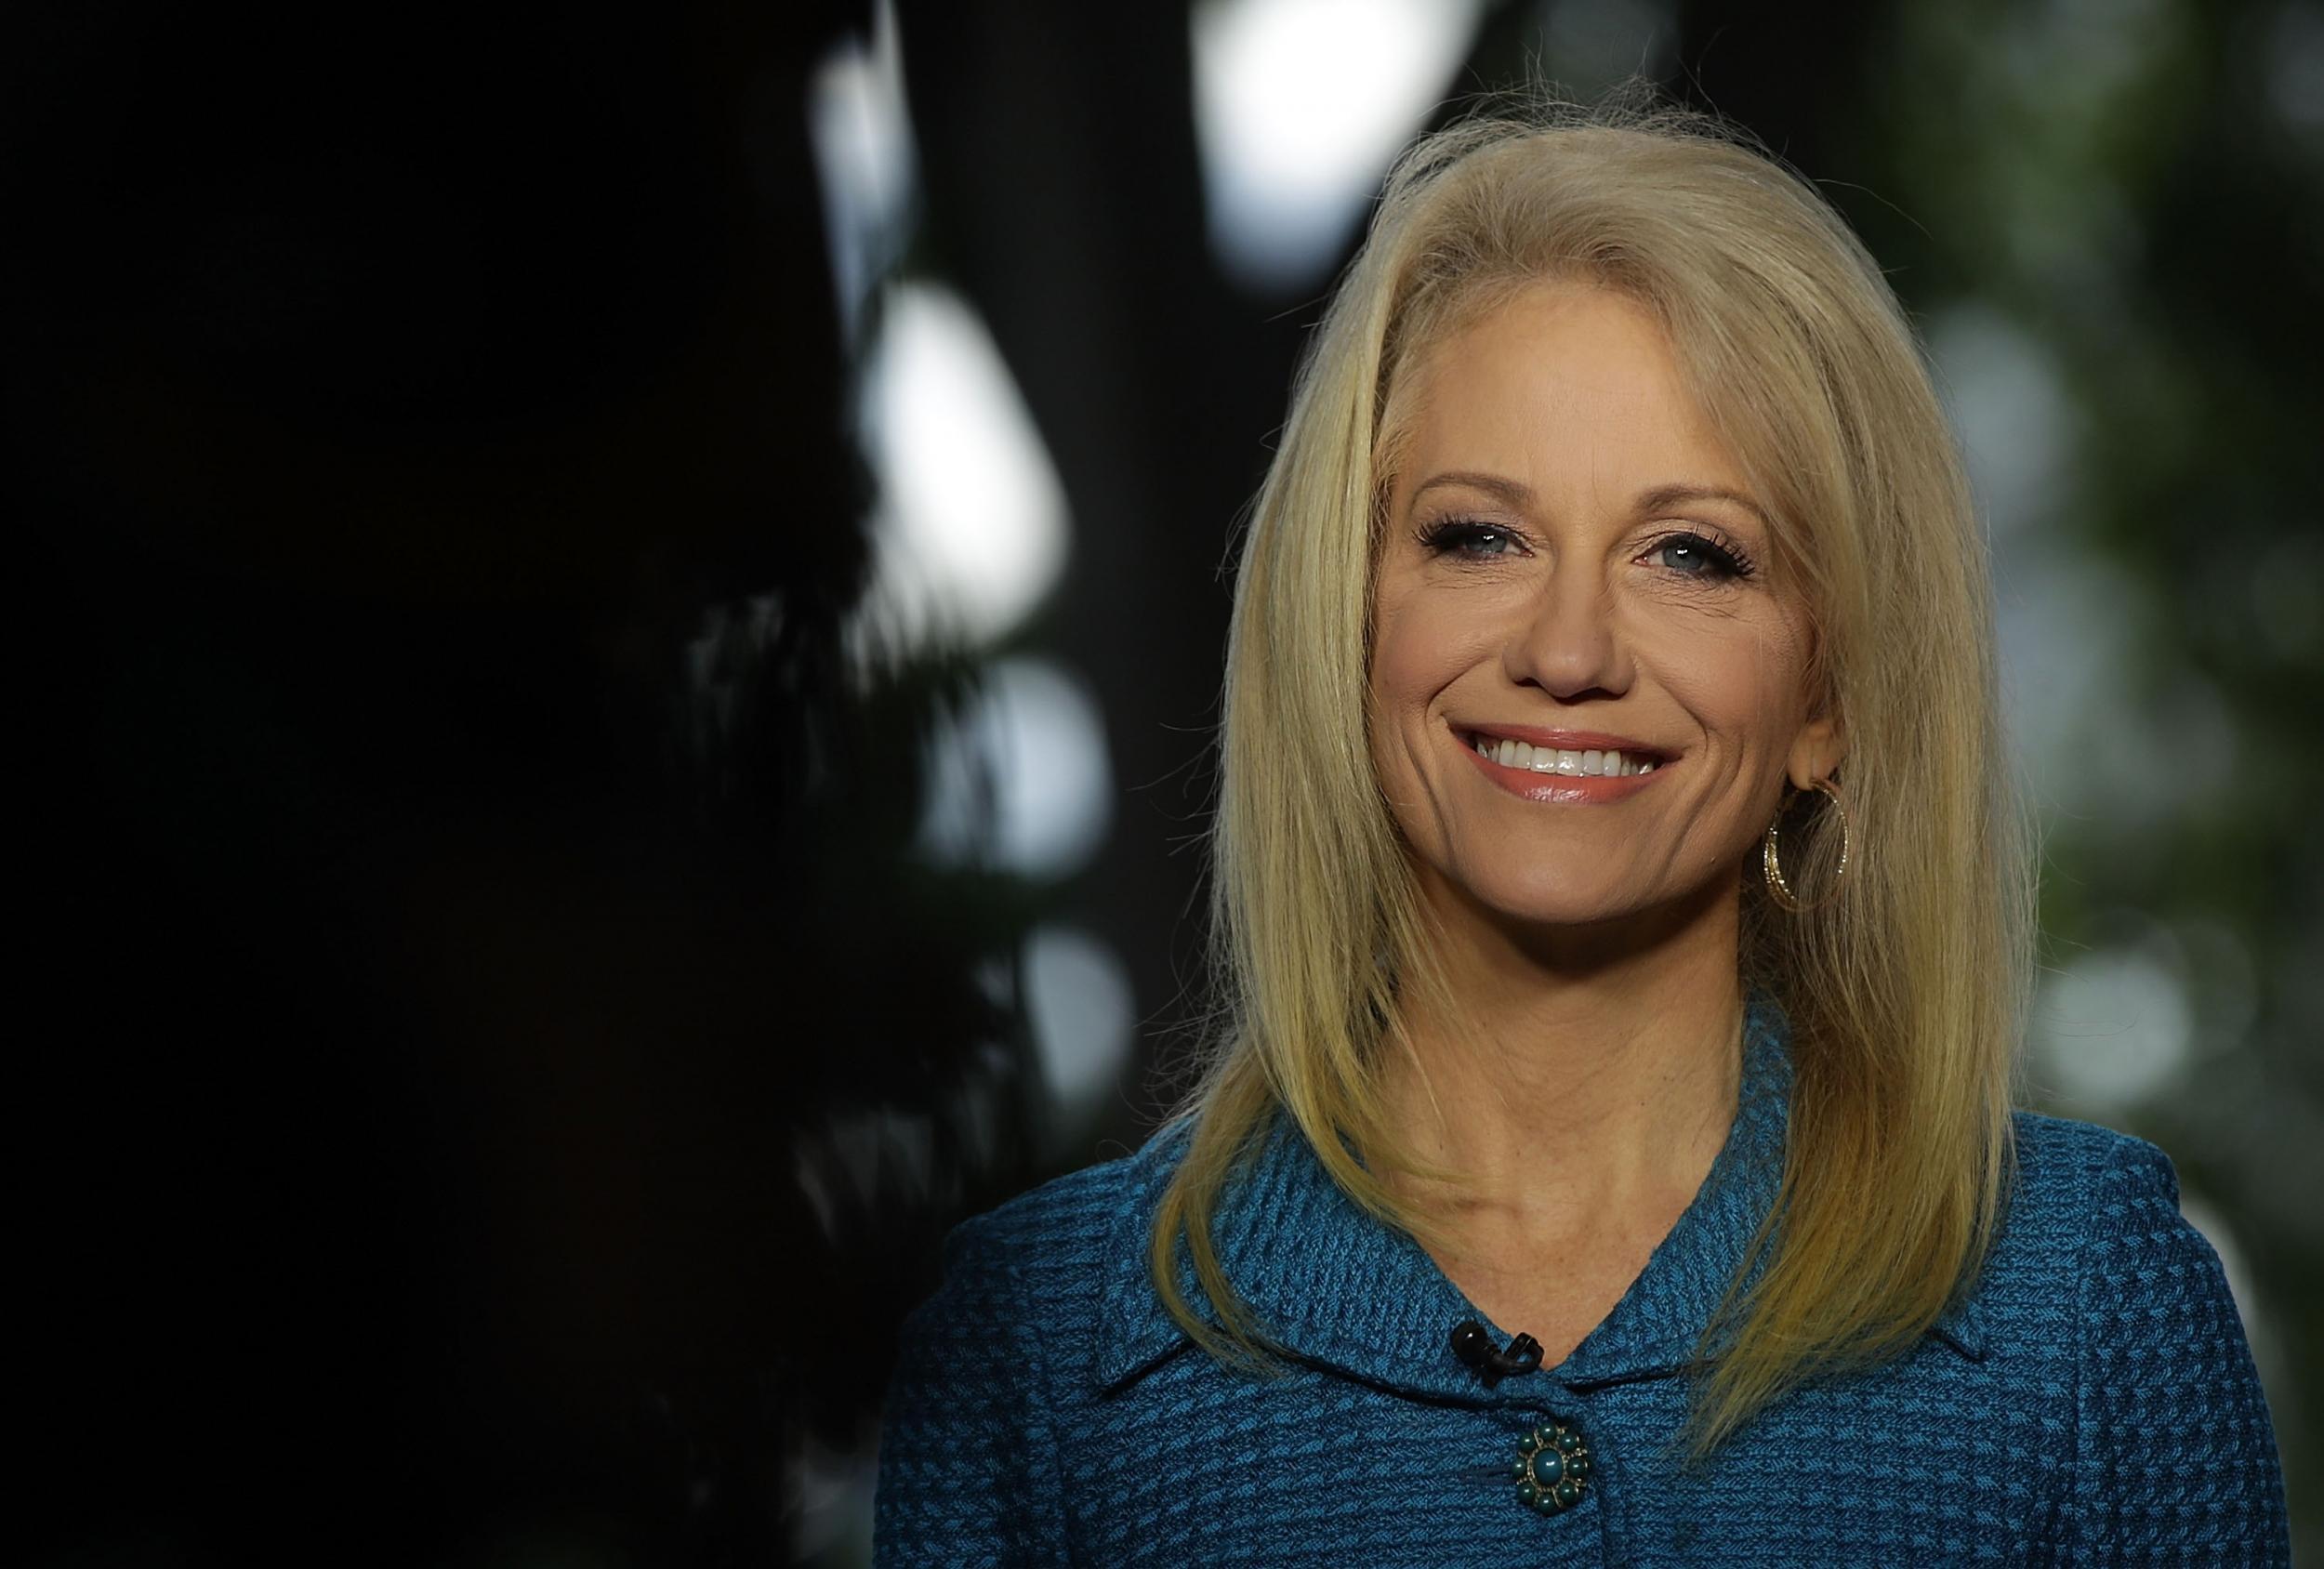 Conway says that the White House hasn't ruled out using polygraph tests on staff